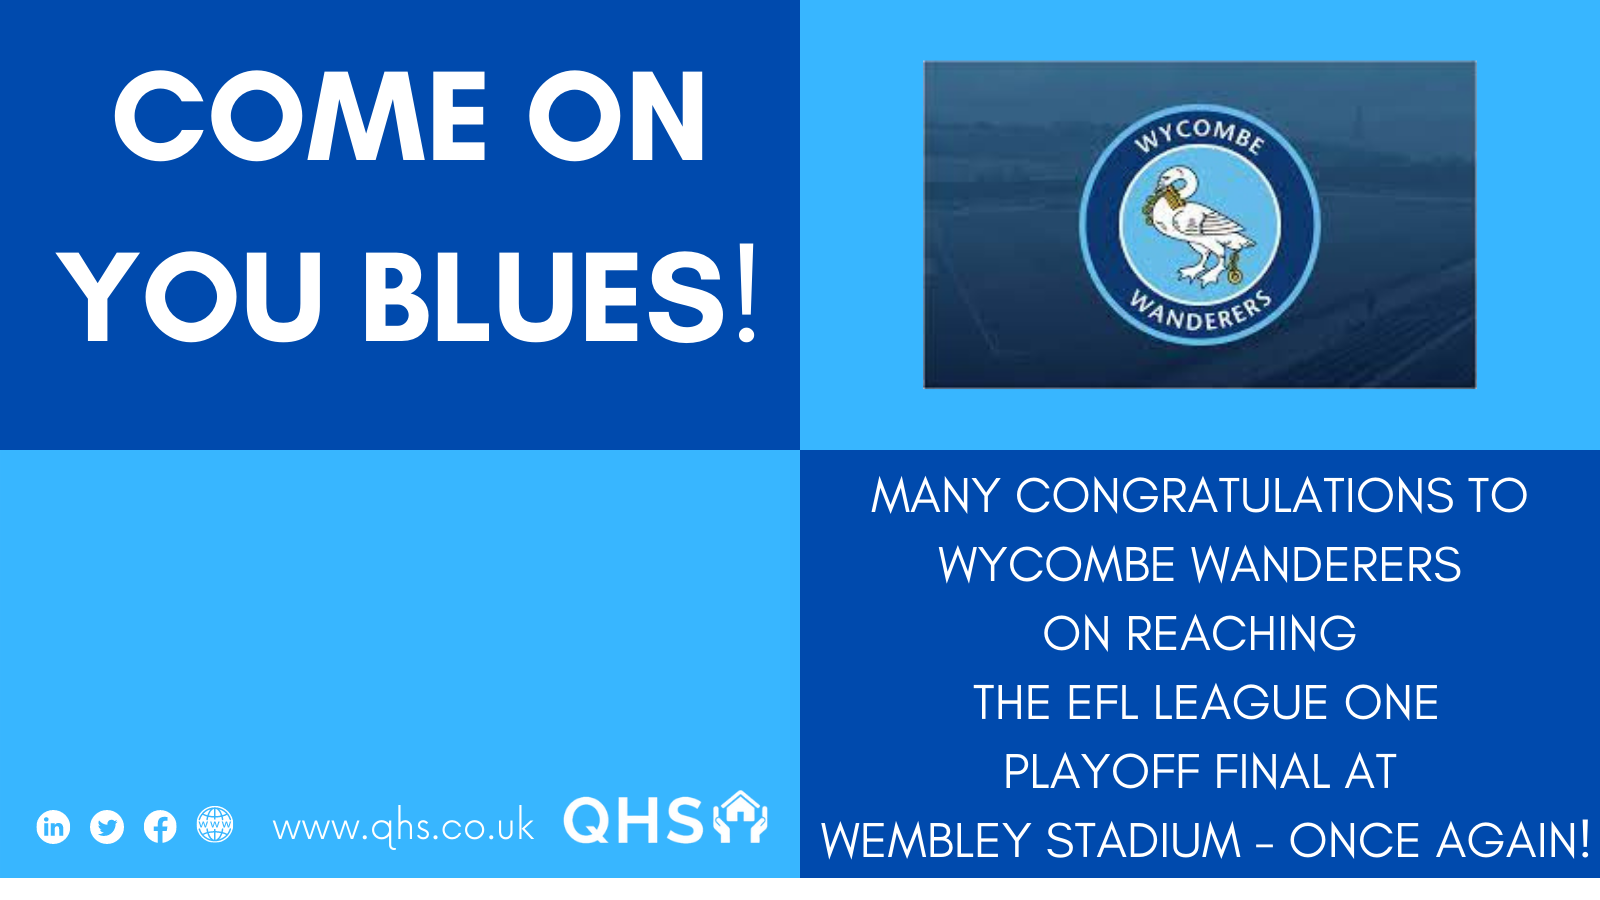 QHS Congratulates Wycombe Wanderers Being EFL Play-Off Finalists